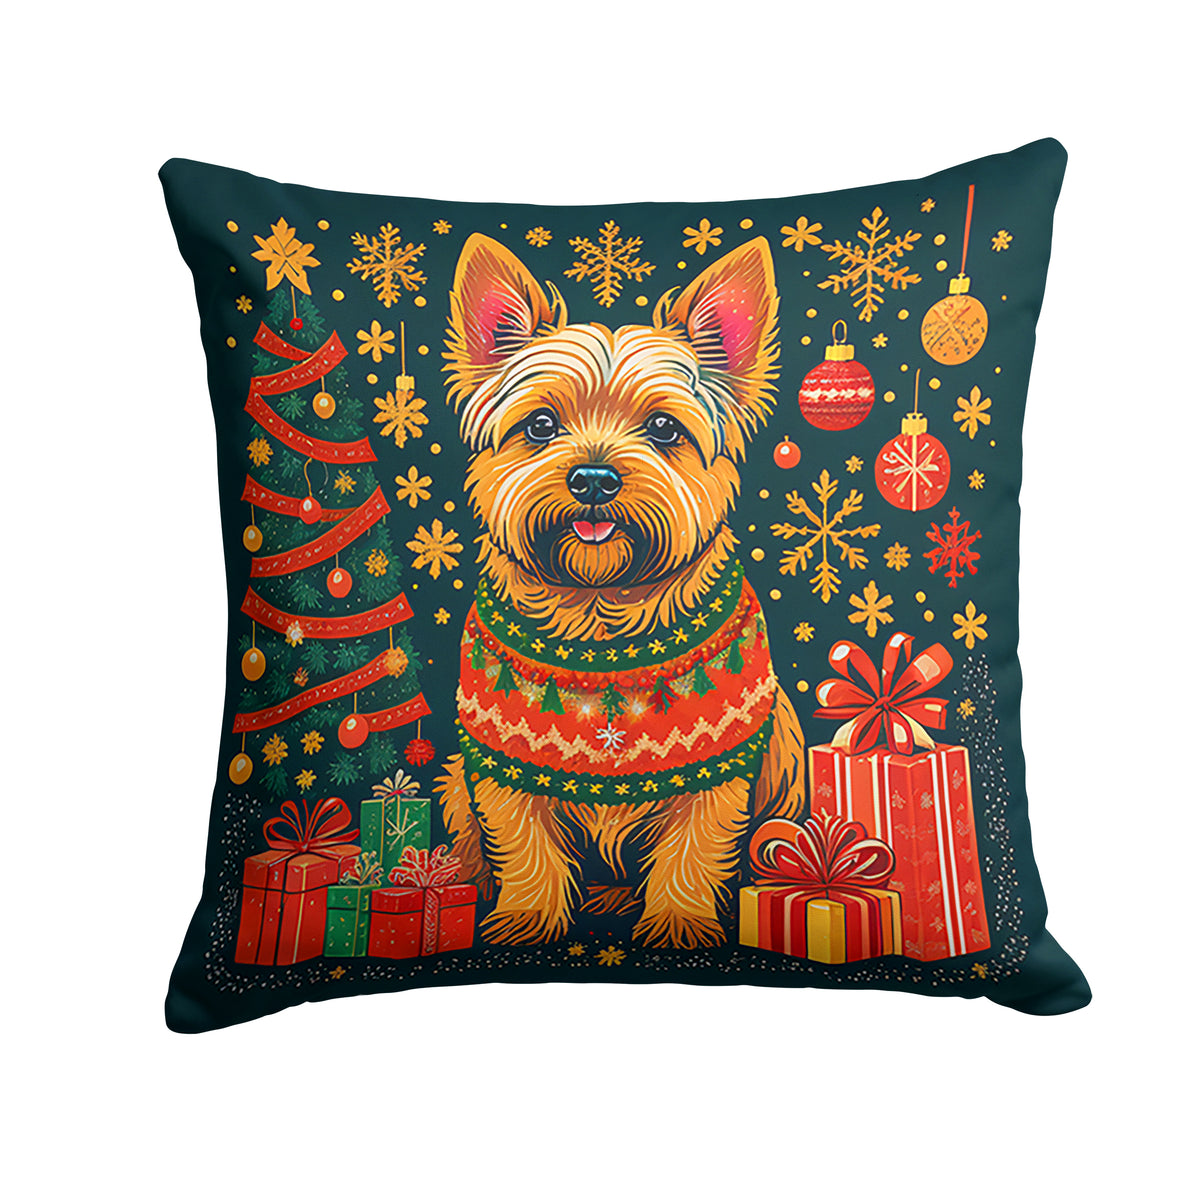 Buy this Norwich Terrier Christmas Fabric Decorative Pillow